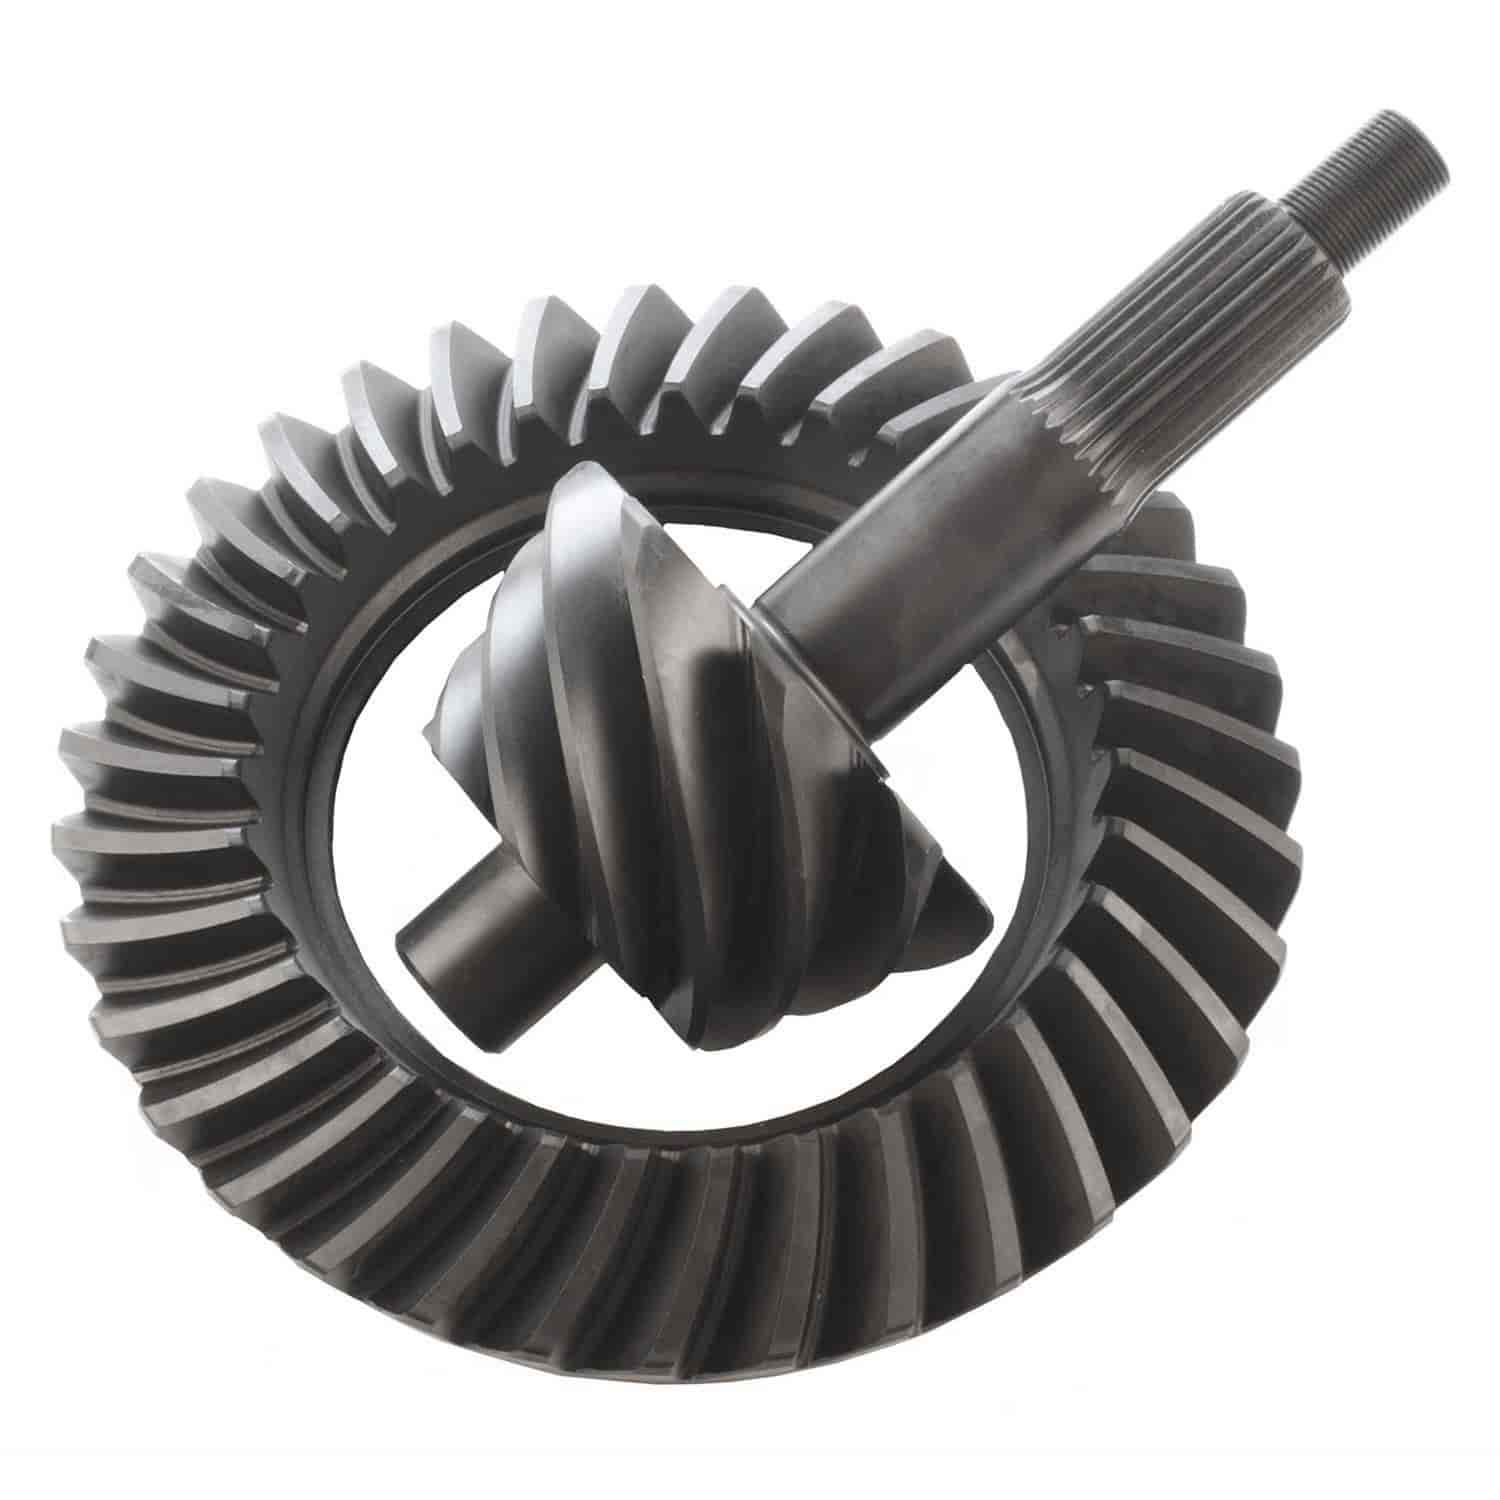 Excel Ring & Pinion Gear Set Ford 9" Ratio: 3.89